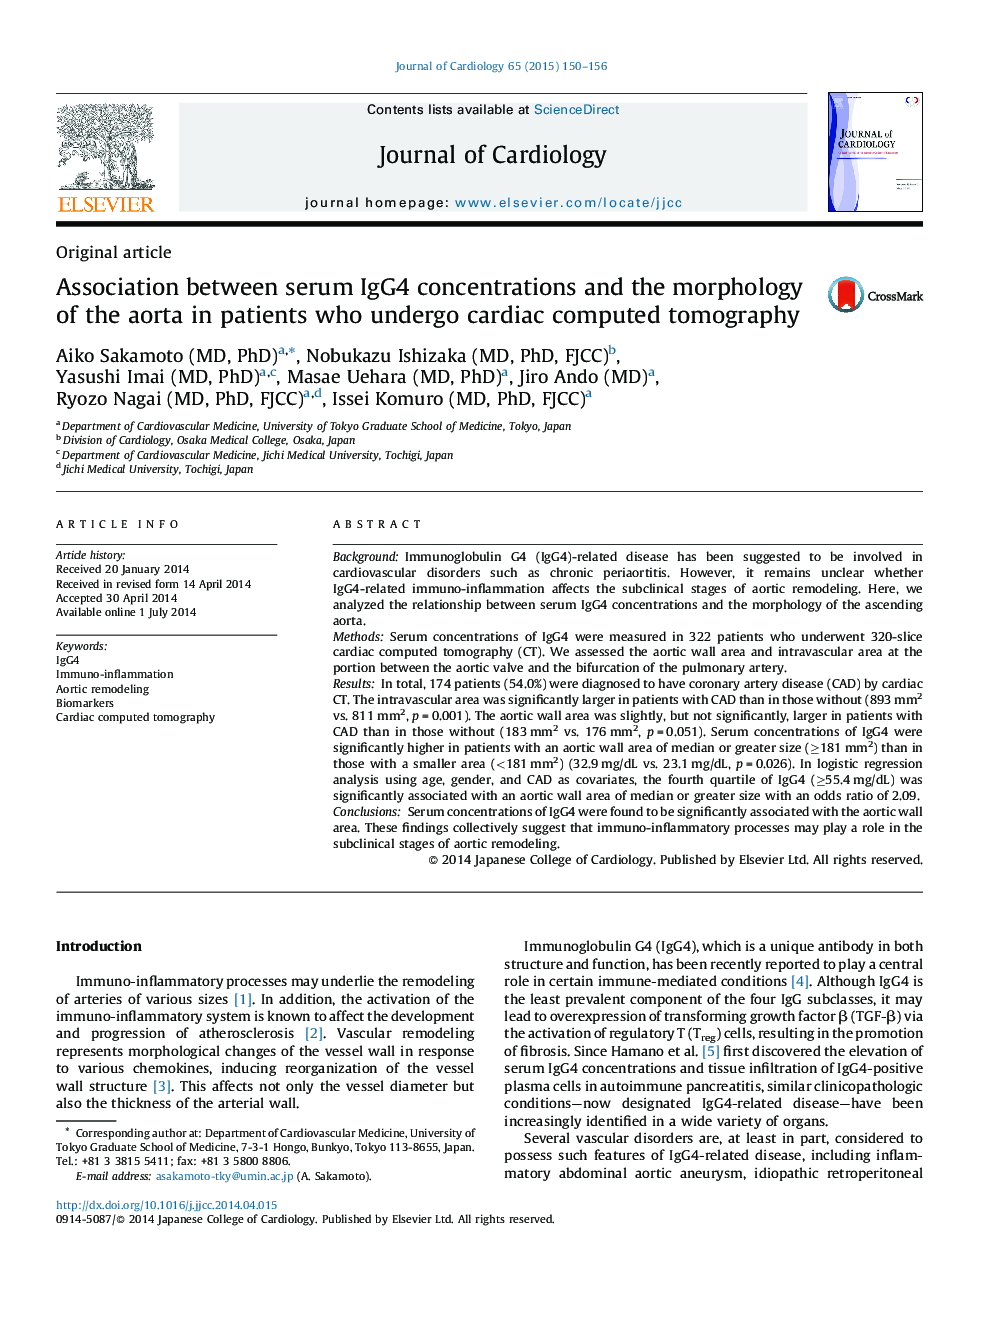 Association between serum IgG4 concentrations and the morphology of the aorta in patients who undergo cardiac computed tomography